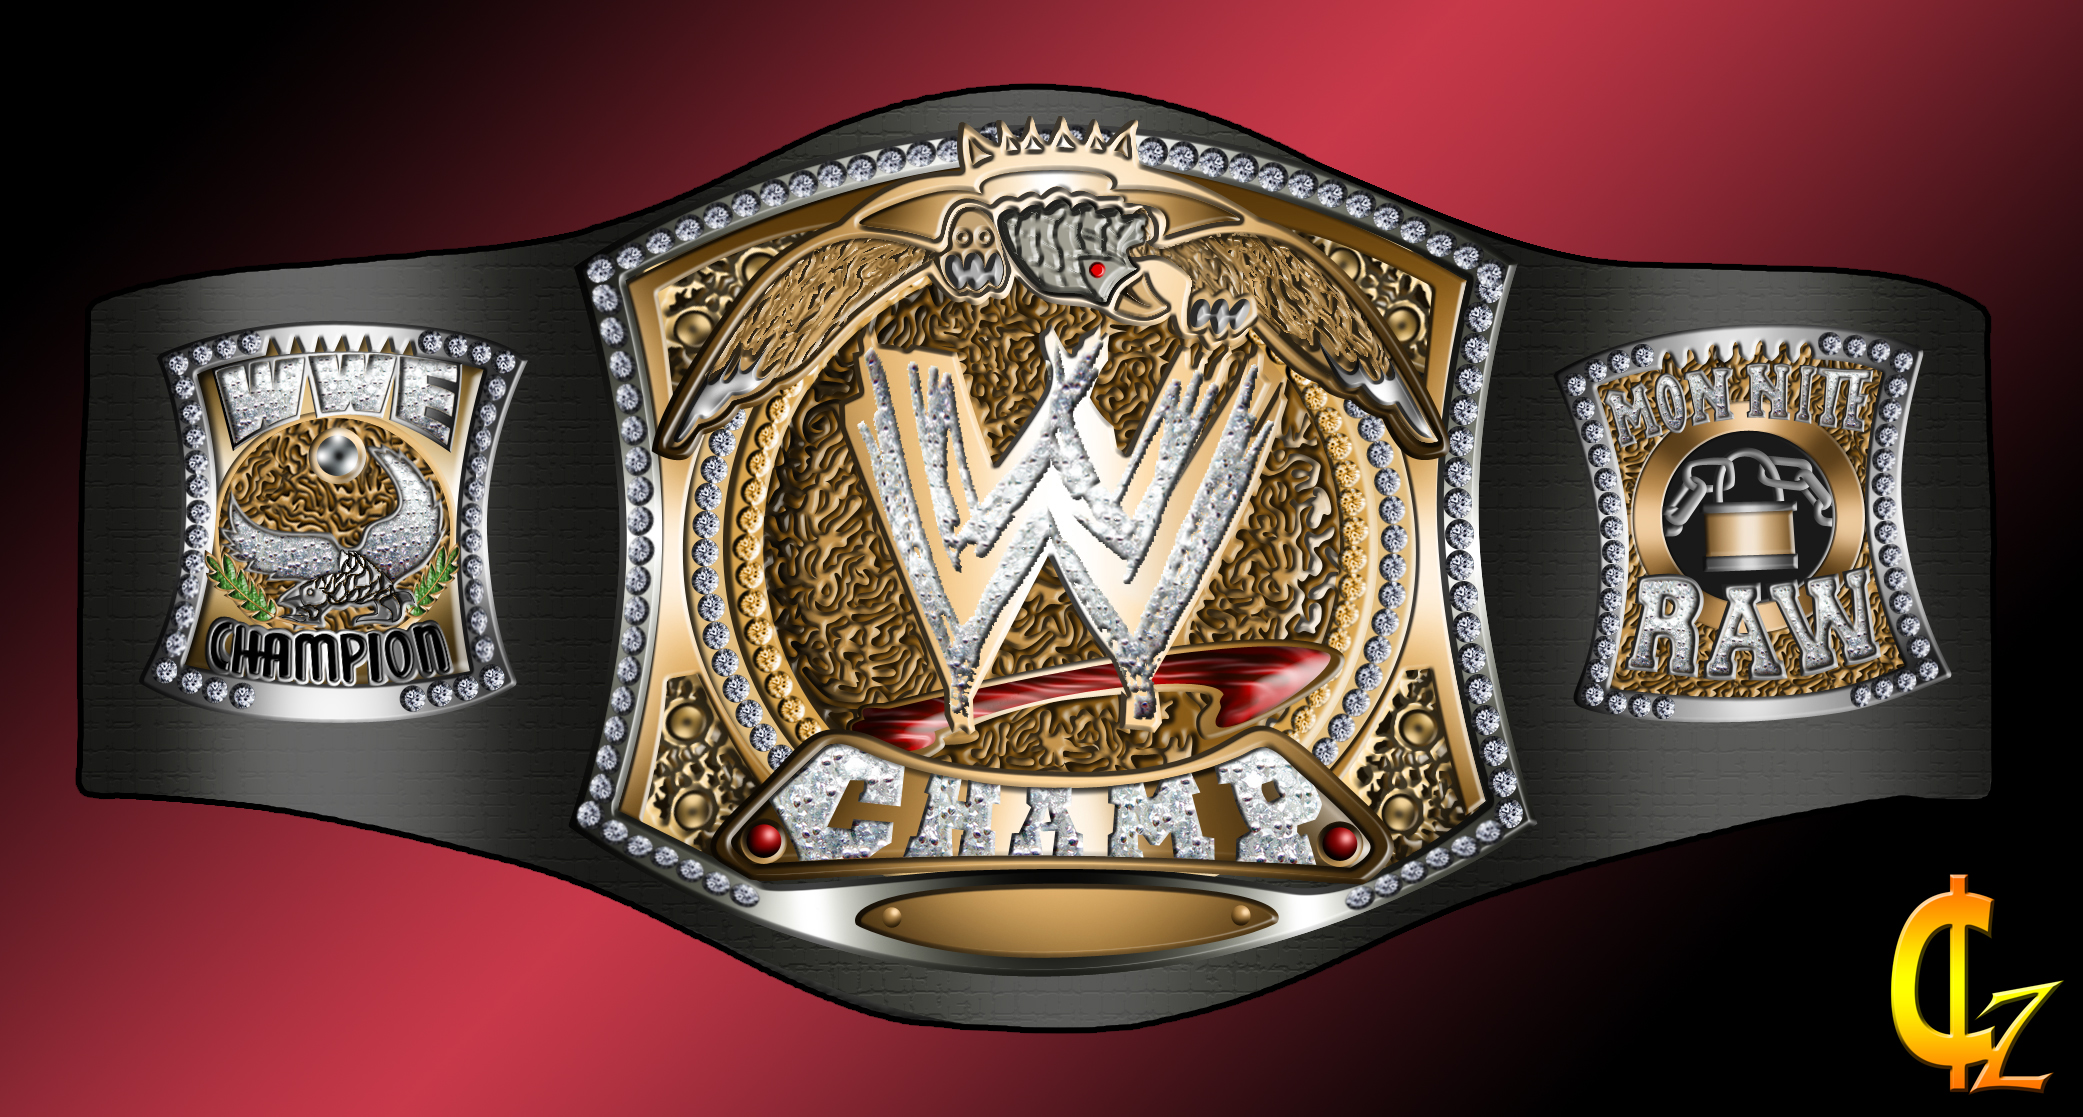 https://static.wikia.nocookie.net/muc/images/a/a2/WWE_Champ_belt.jpg/revision/latest?cb=20190322122902